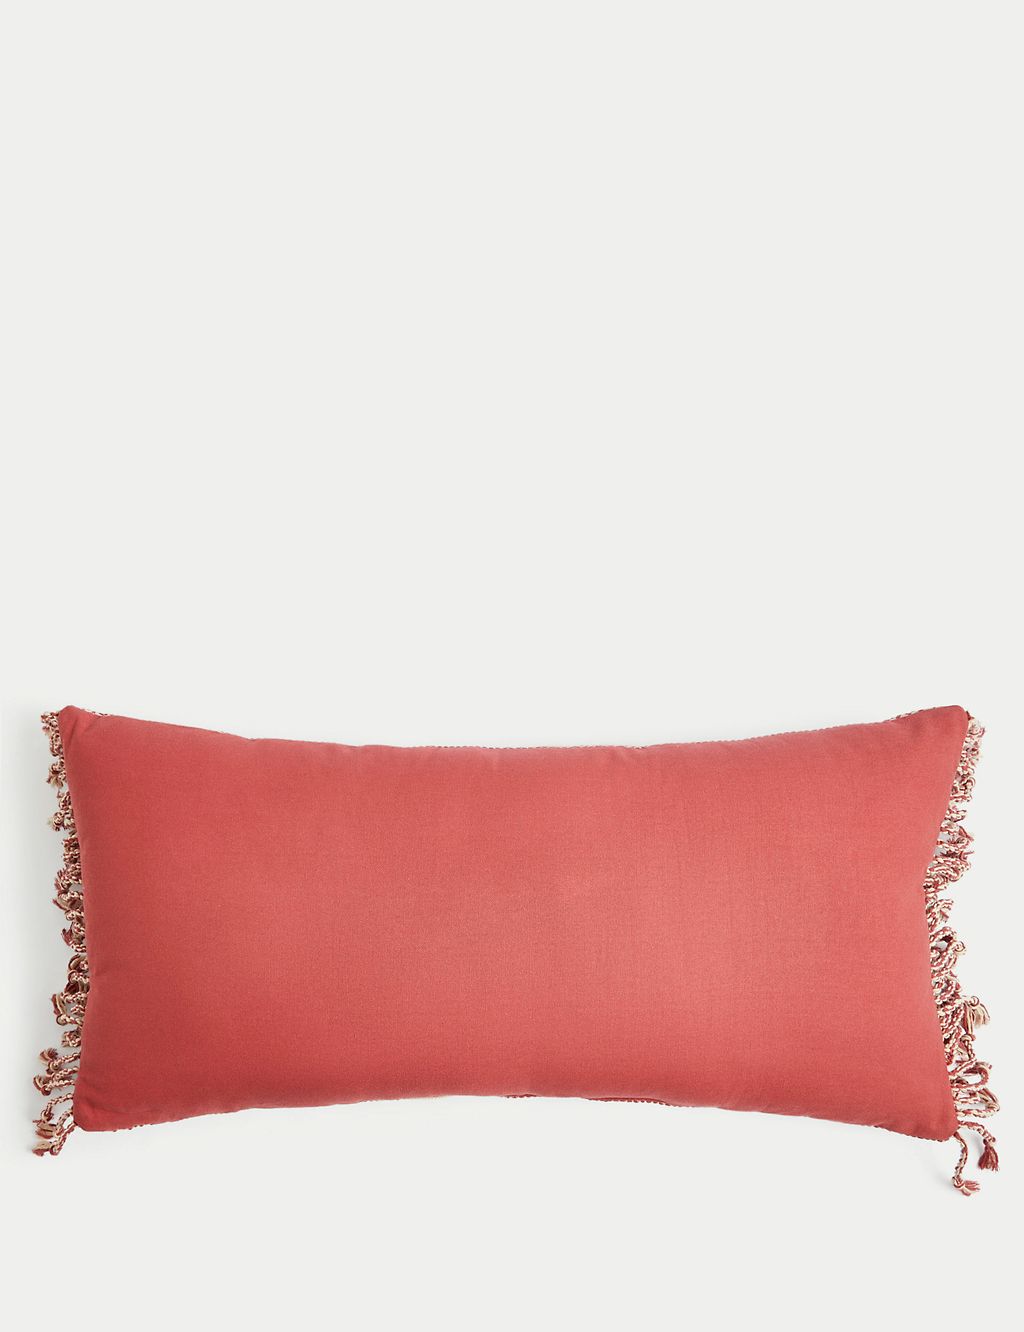 Jaipur Bassi Woven Outdoor Bolster Cushion 2 of 4